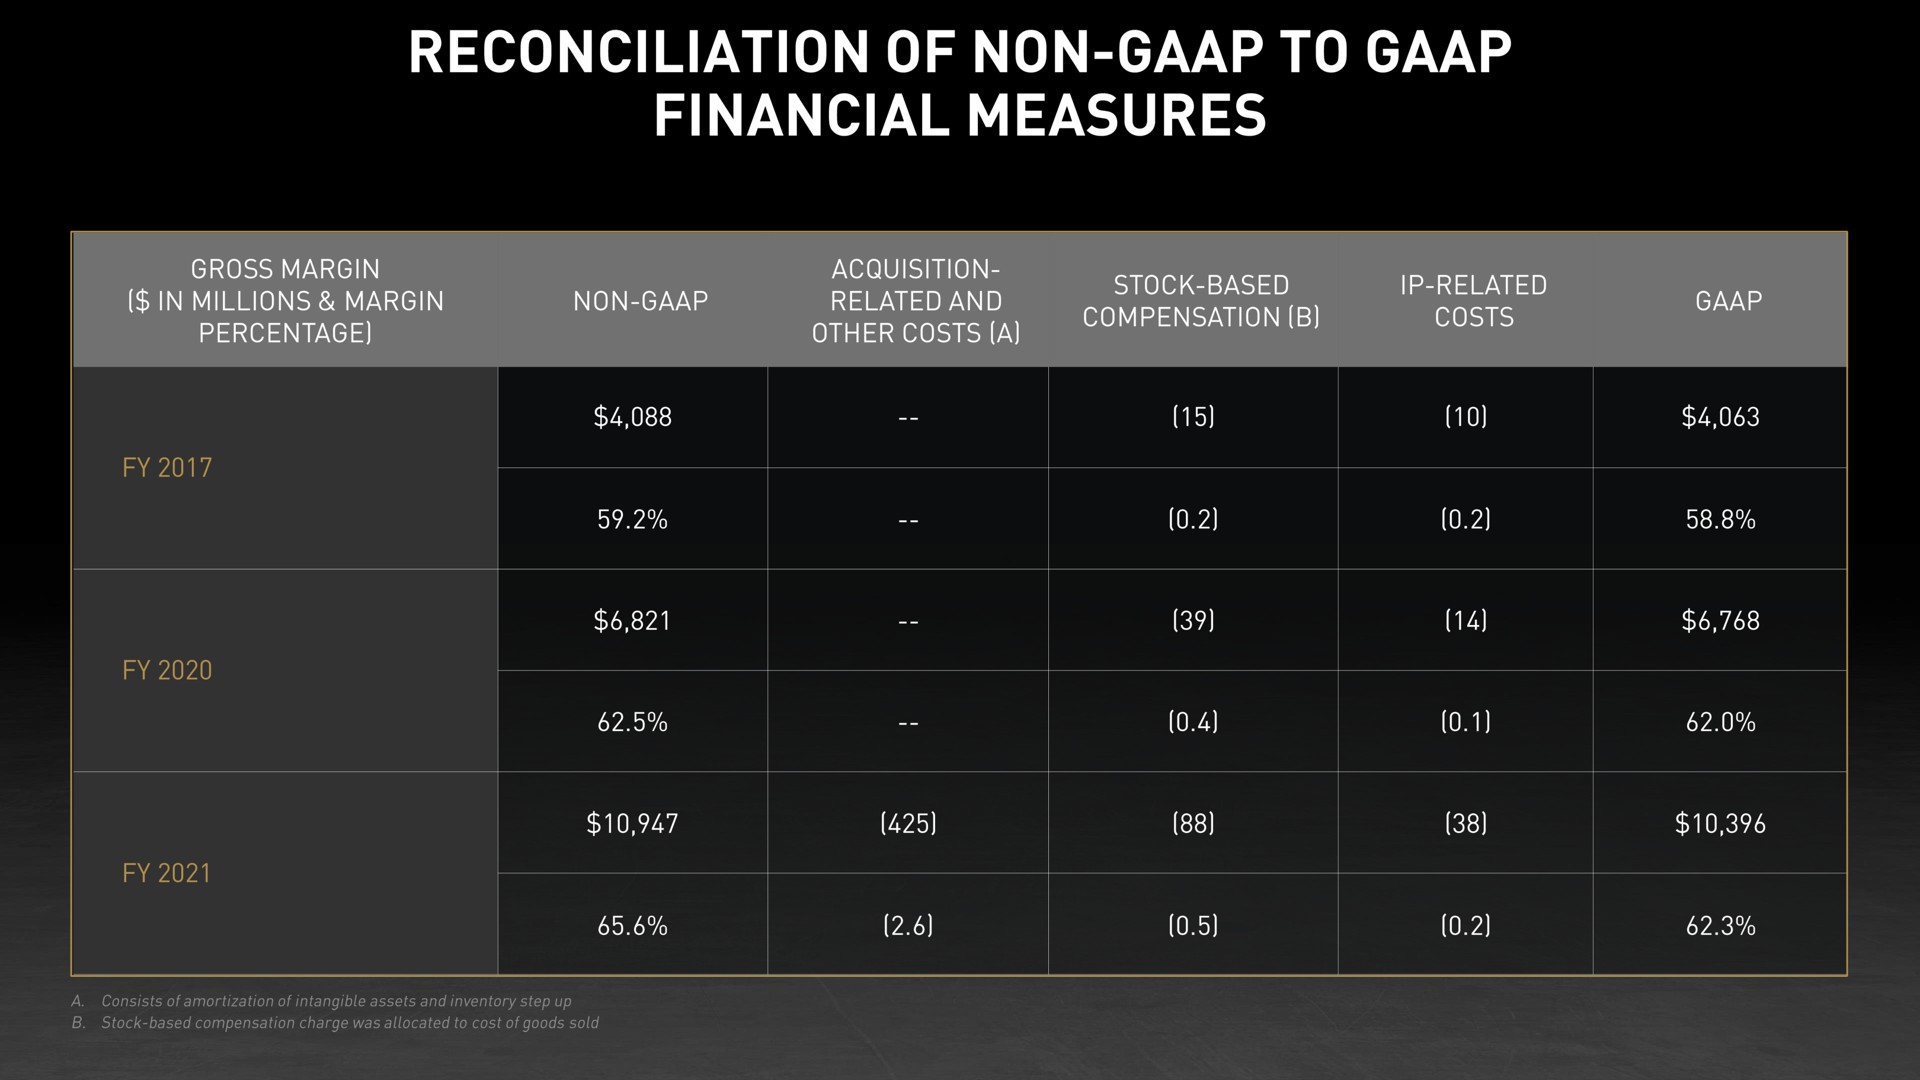 reconciliation of non to financial measures | NVIDIA